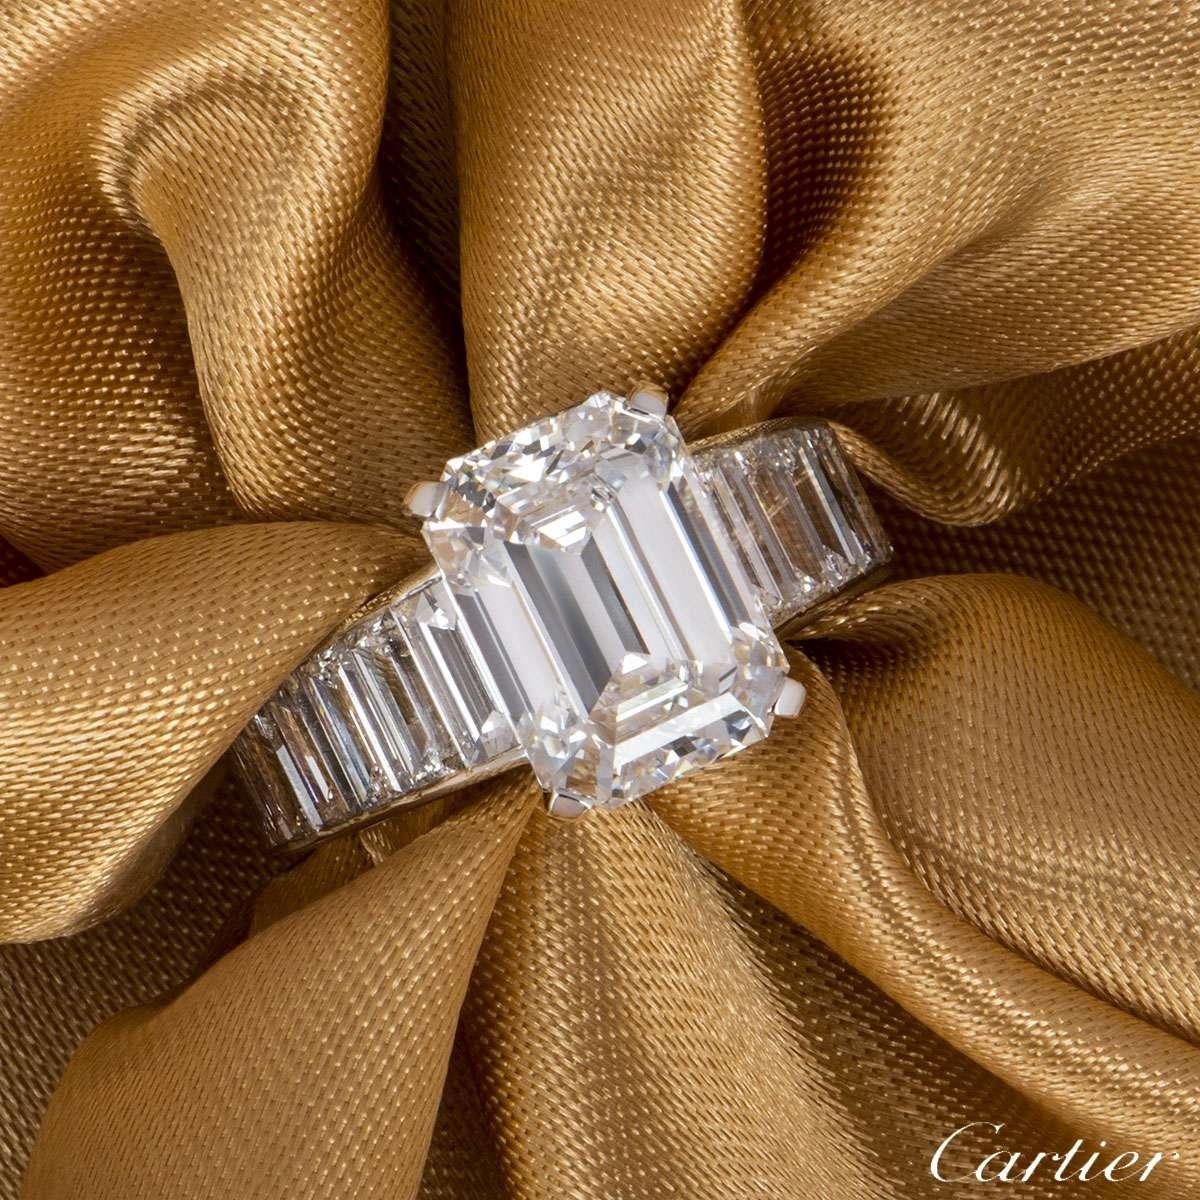 A remarkable emerald cut diamond ring by Cartier. The ring is set to the centre with a 4.12ct diamond, E colour and VVS2 clarity. Complementing the central diamond are 18 baguette cut diamond set shoulders and 2 on the mount with a total weight of